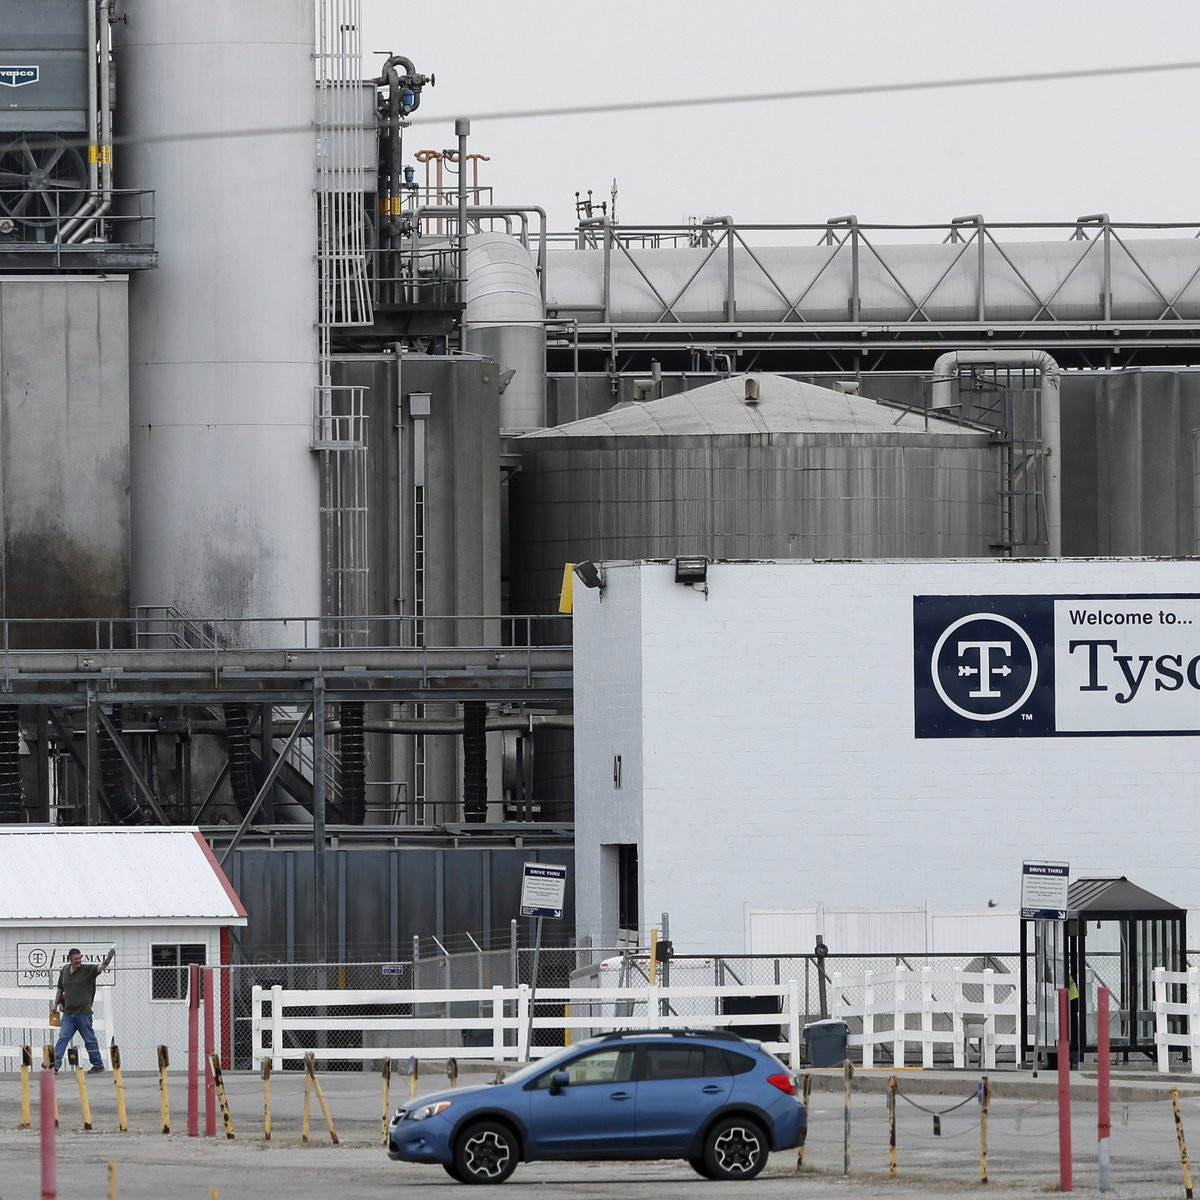 Tyson Foods Production Worker Resume Sample Waterloo Tyson Plant Resumes Operations after Bomb Threat Called In